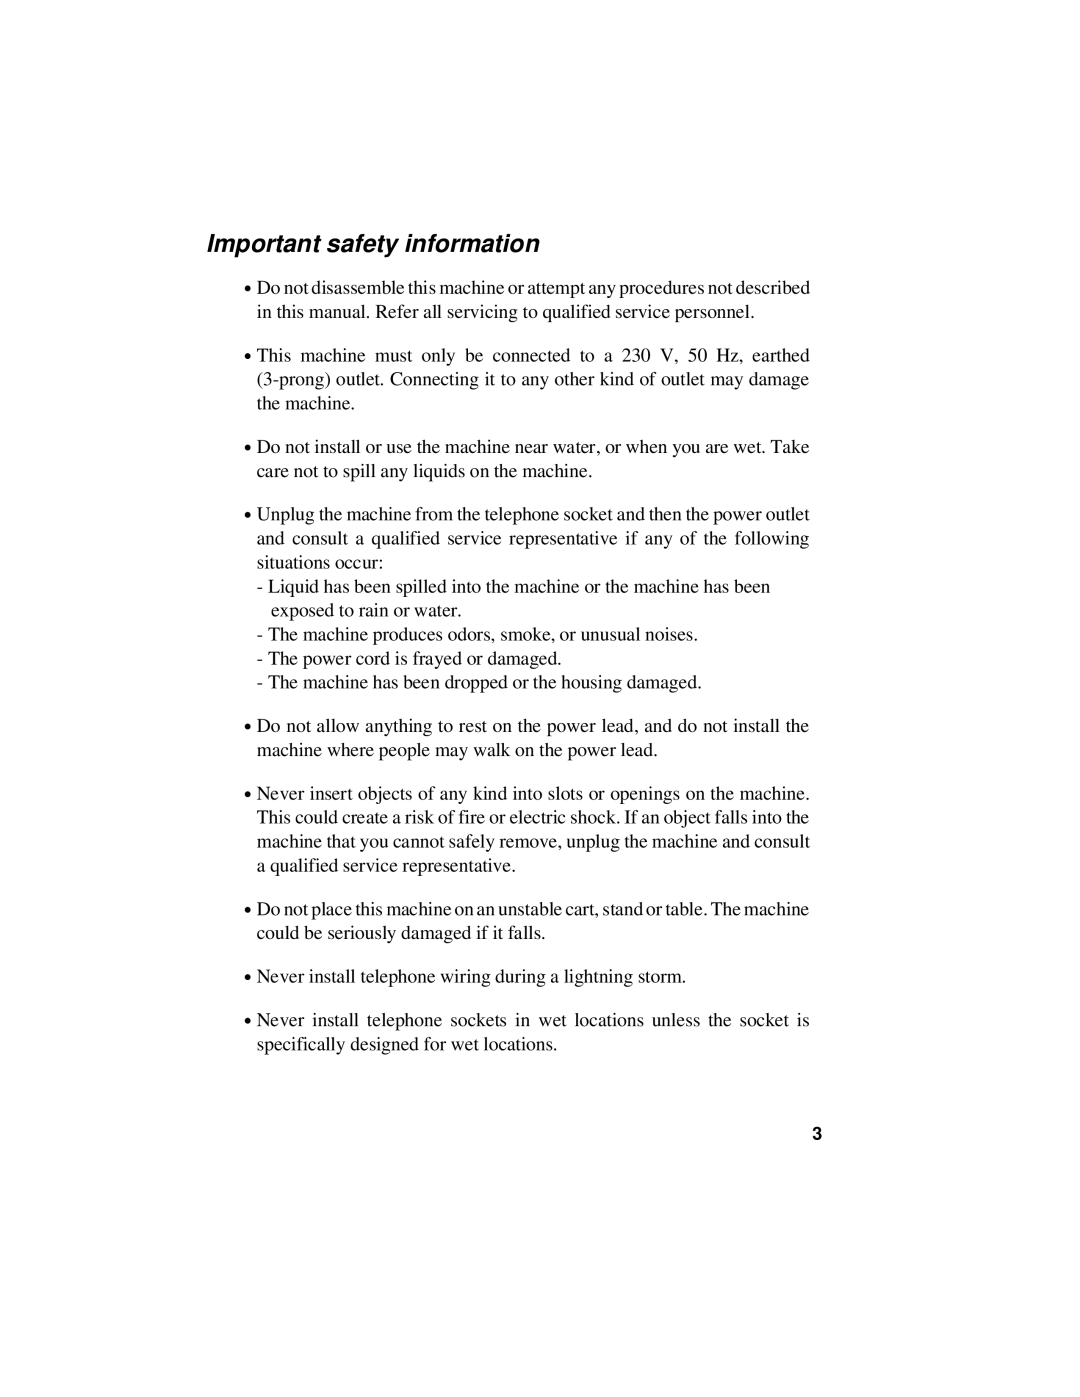 Sharp UX-470 operation manual Important safety information 